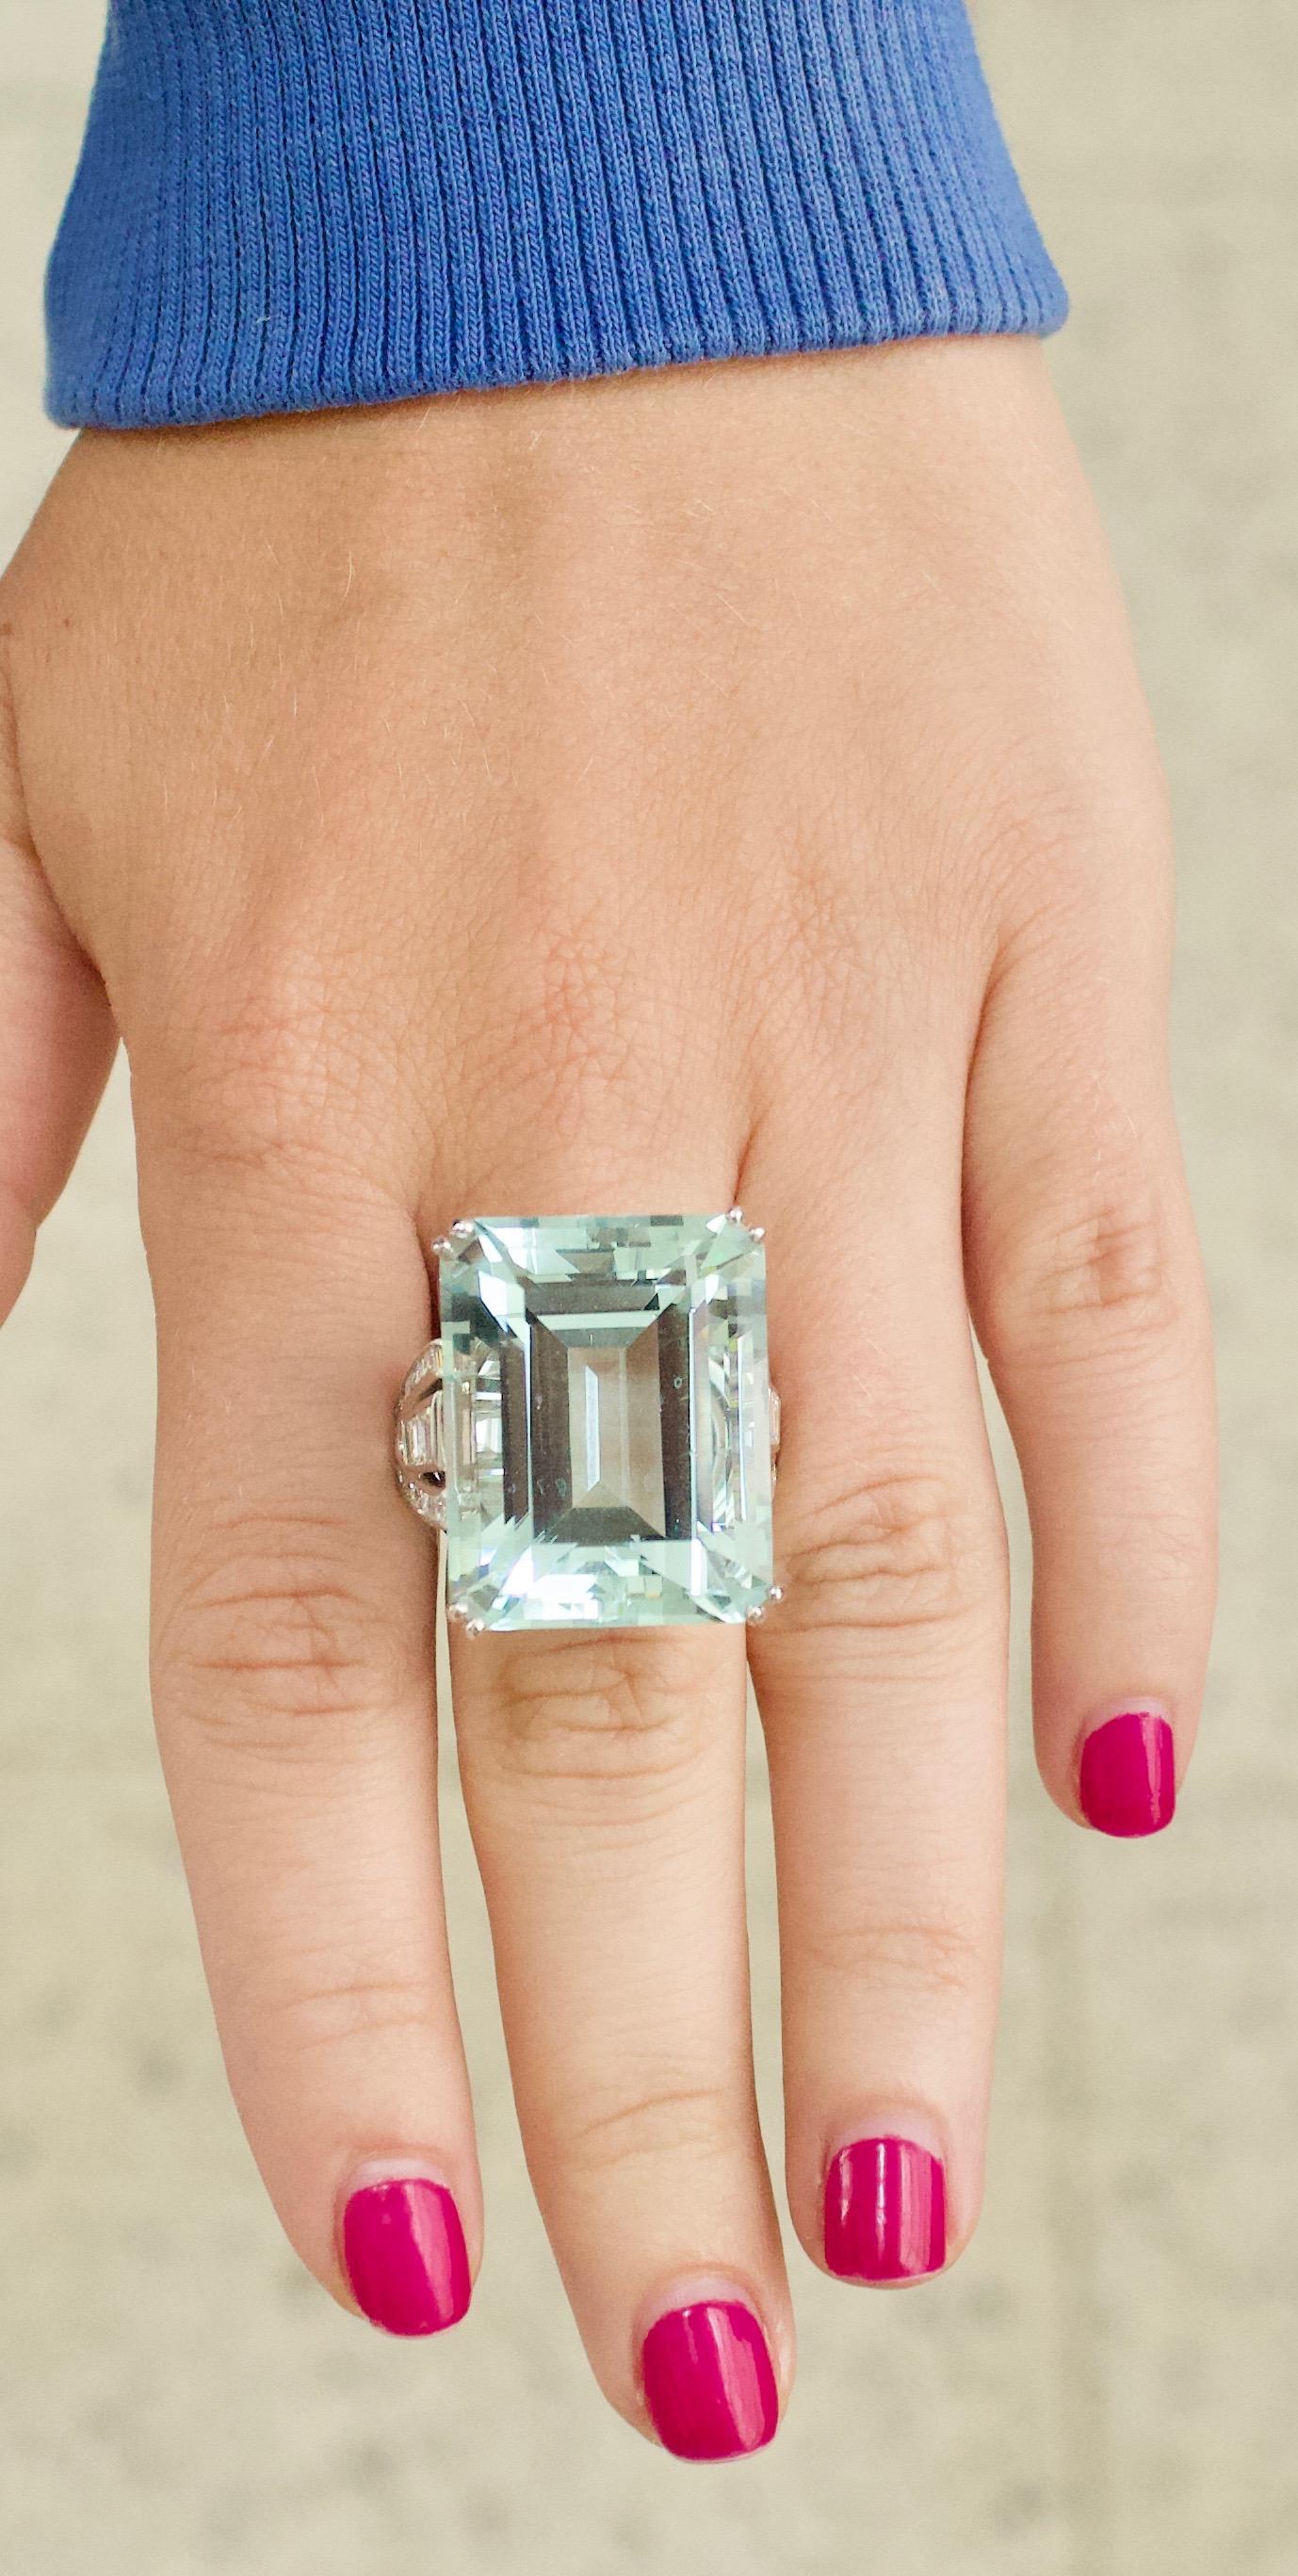 Gigantic 56.65 carat Aquamarine and Diamond  Ring in White Gold
Emerald Cut  Aquamarine weighing 56.65 carats [bright with no imperfections visible to the naked eye]
Eight Baguuettet Cut Diamonds weighing 1.00 carats approximately
Sixteen Square Cut